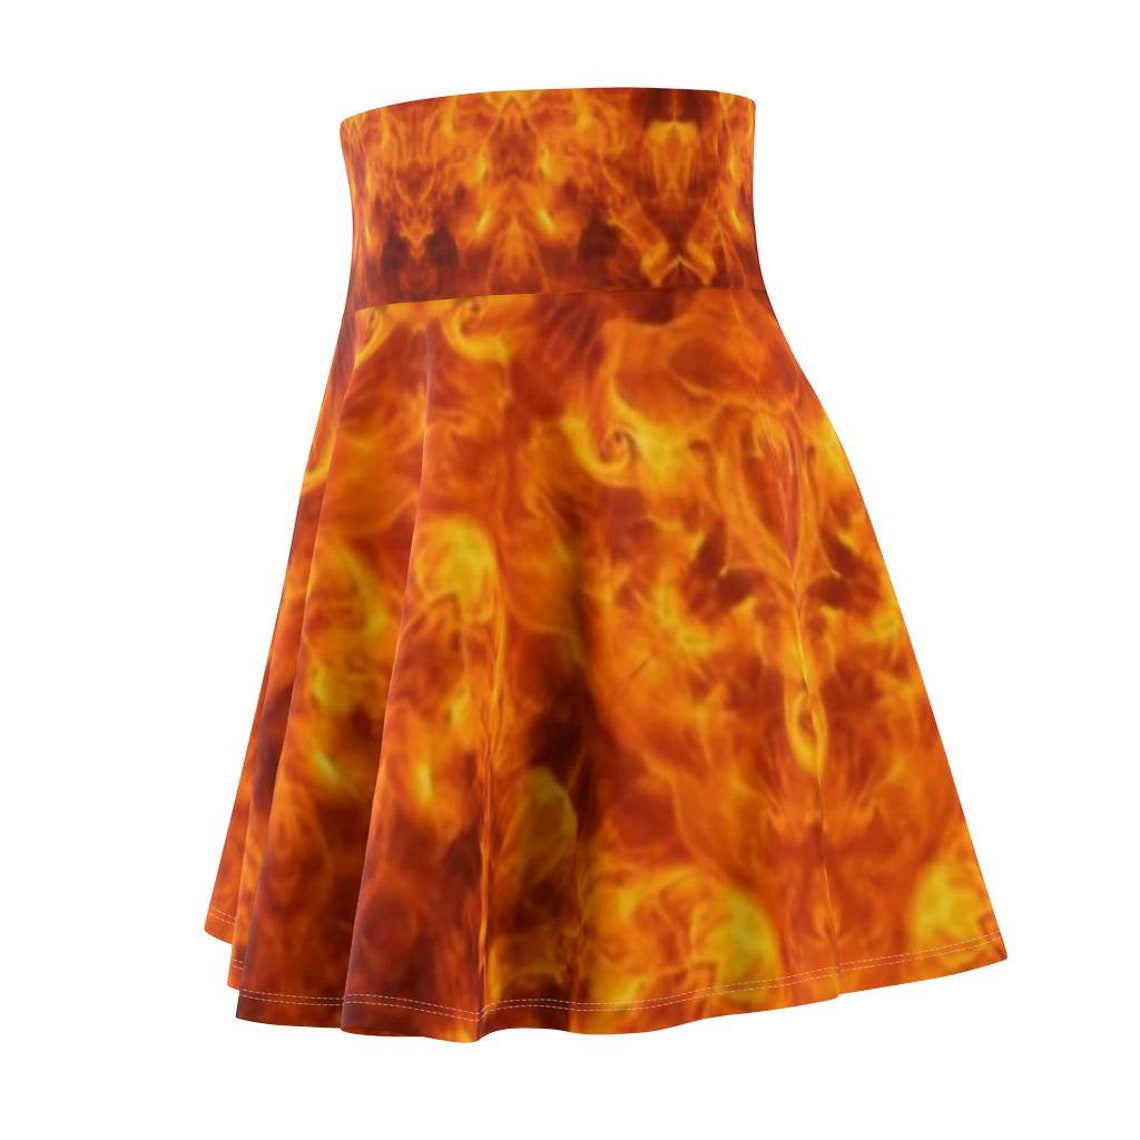 Skater Skirt with flame print from a natural fractal pattern. | Etsy